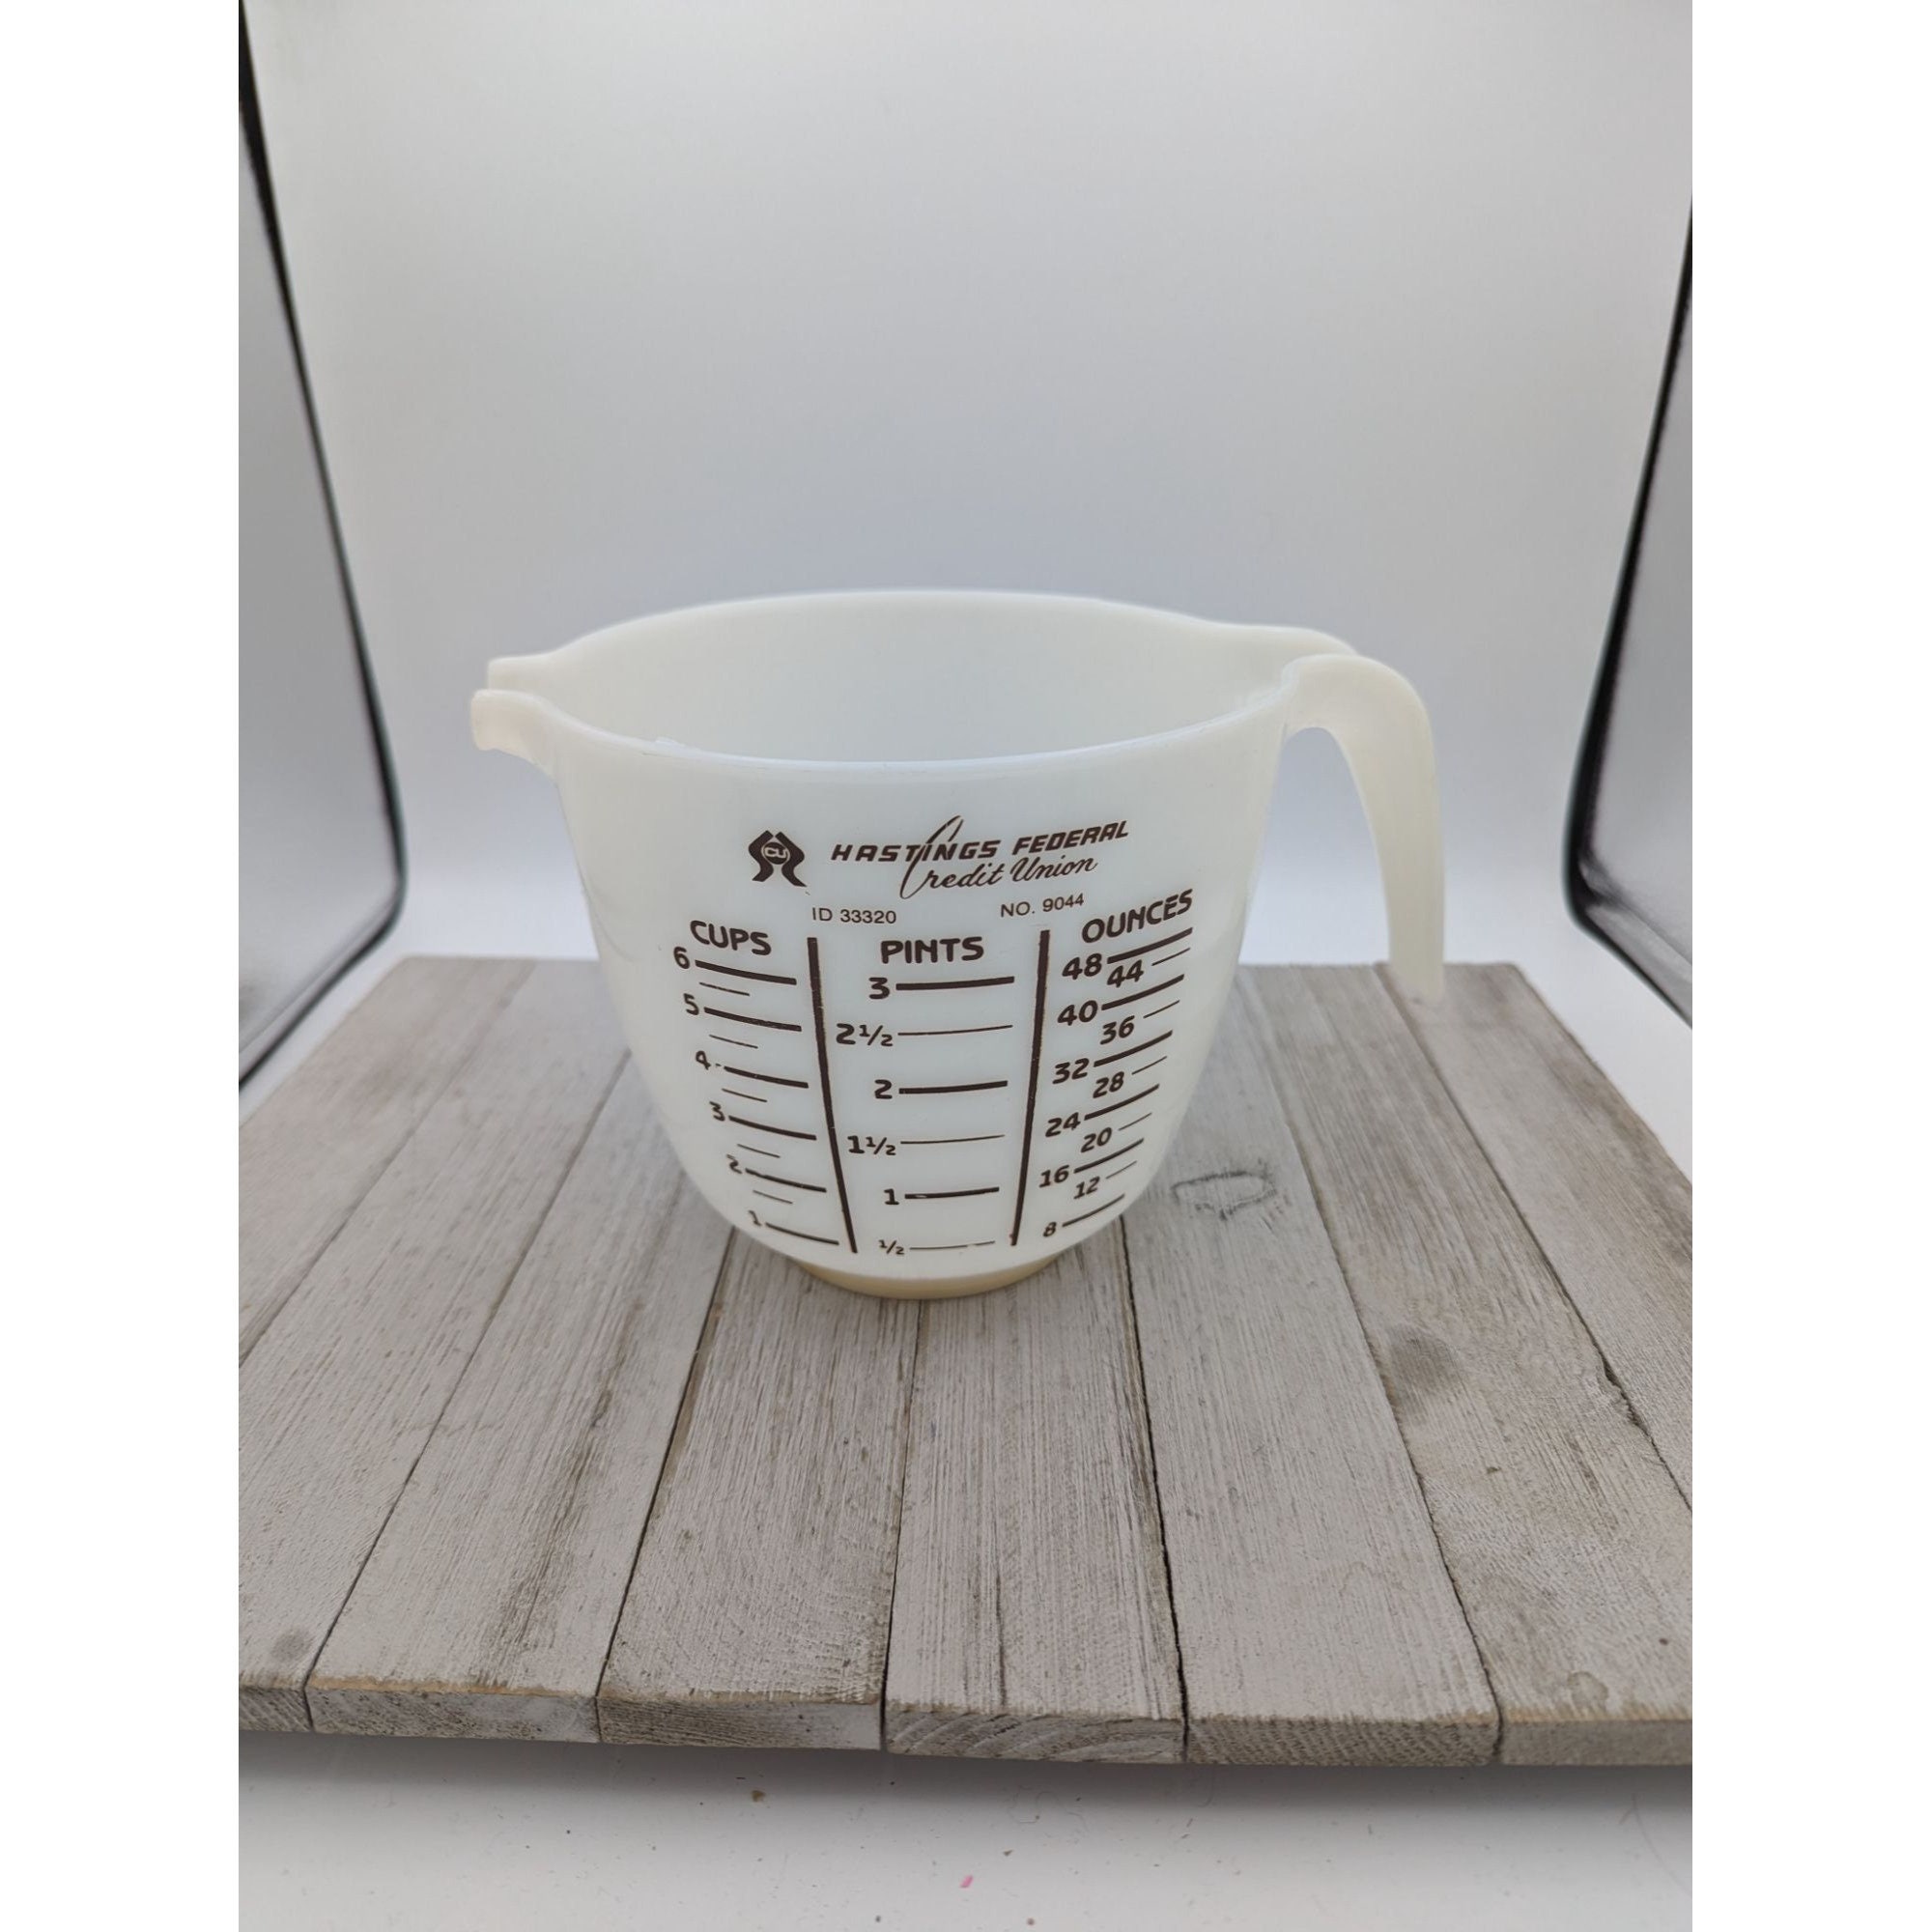 Advertising Large Measuring Bowl Cup 6 Cups White Hastings Federal Credit  Union 